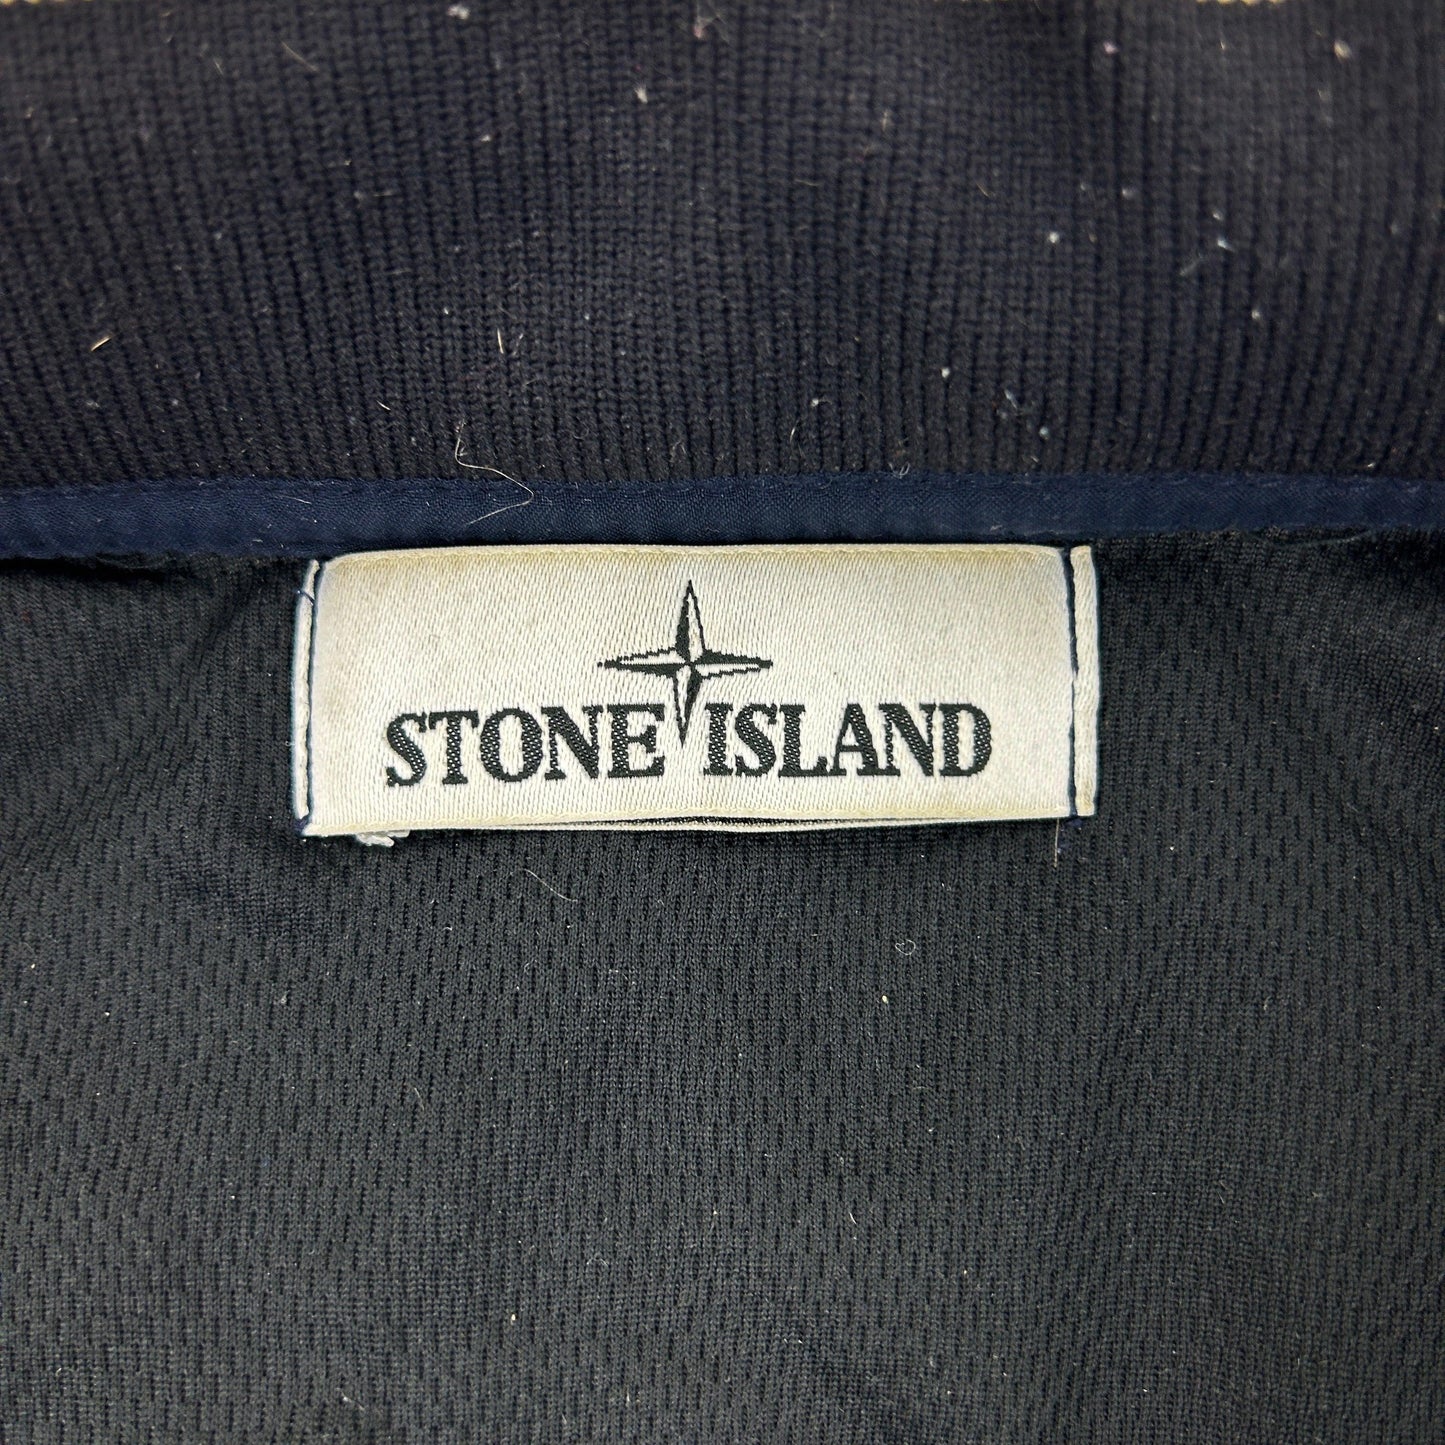 Vintage Stone Island Light Soft Shell R Jacket Size S - Known Source